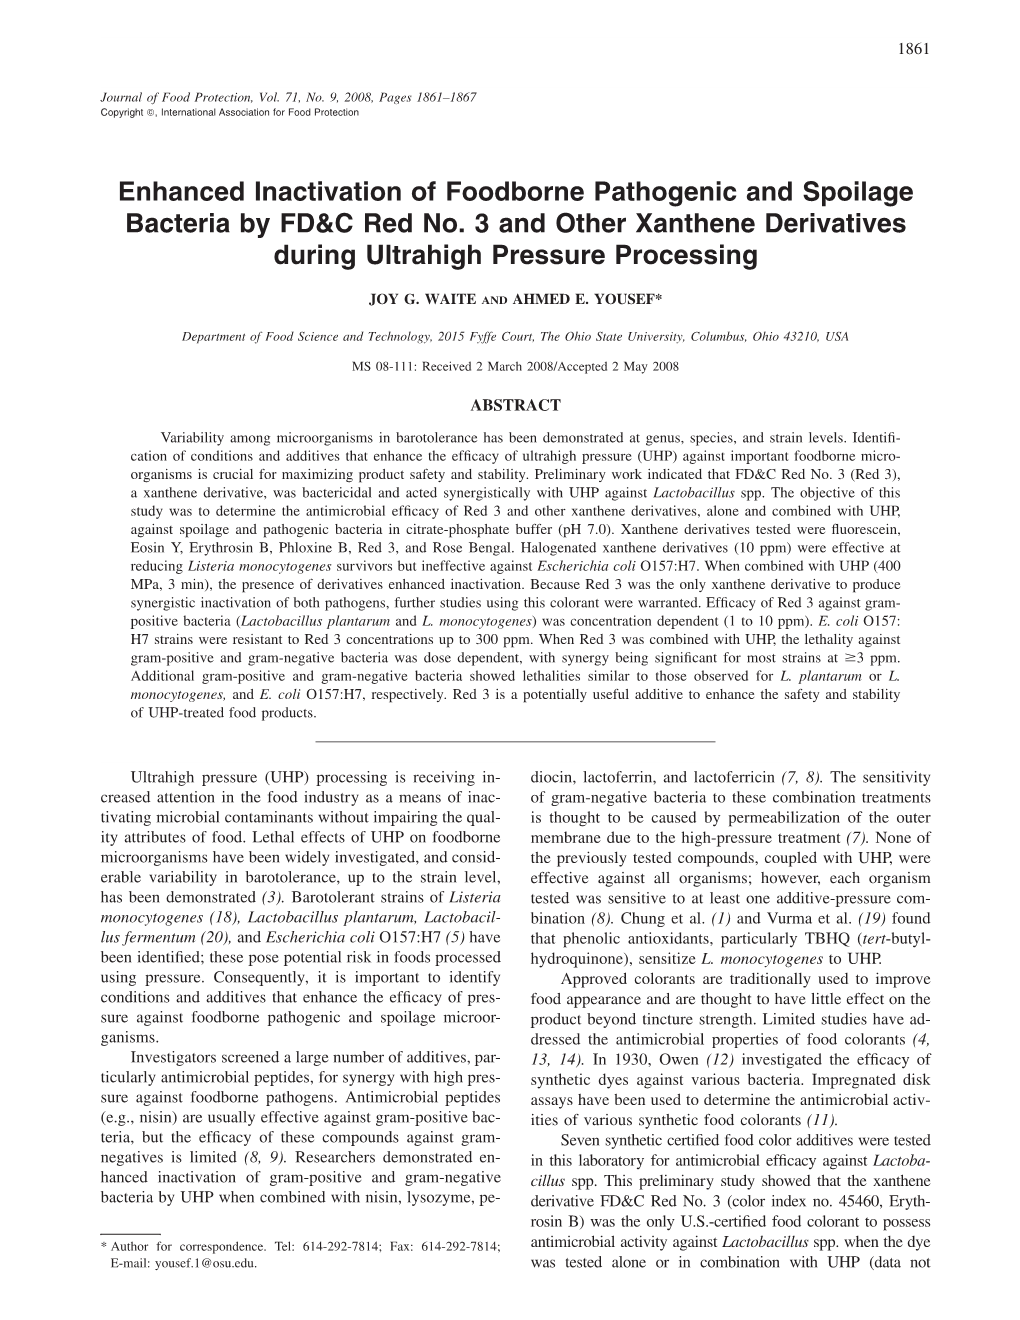 Enhanced Inactivation of Foodborne Pathogenic and Spoilage Bacteria by FD&C Red No